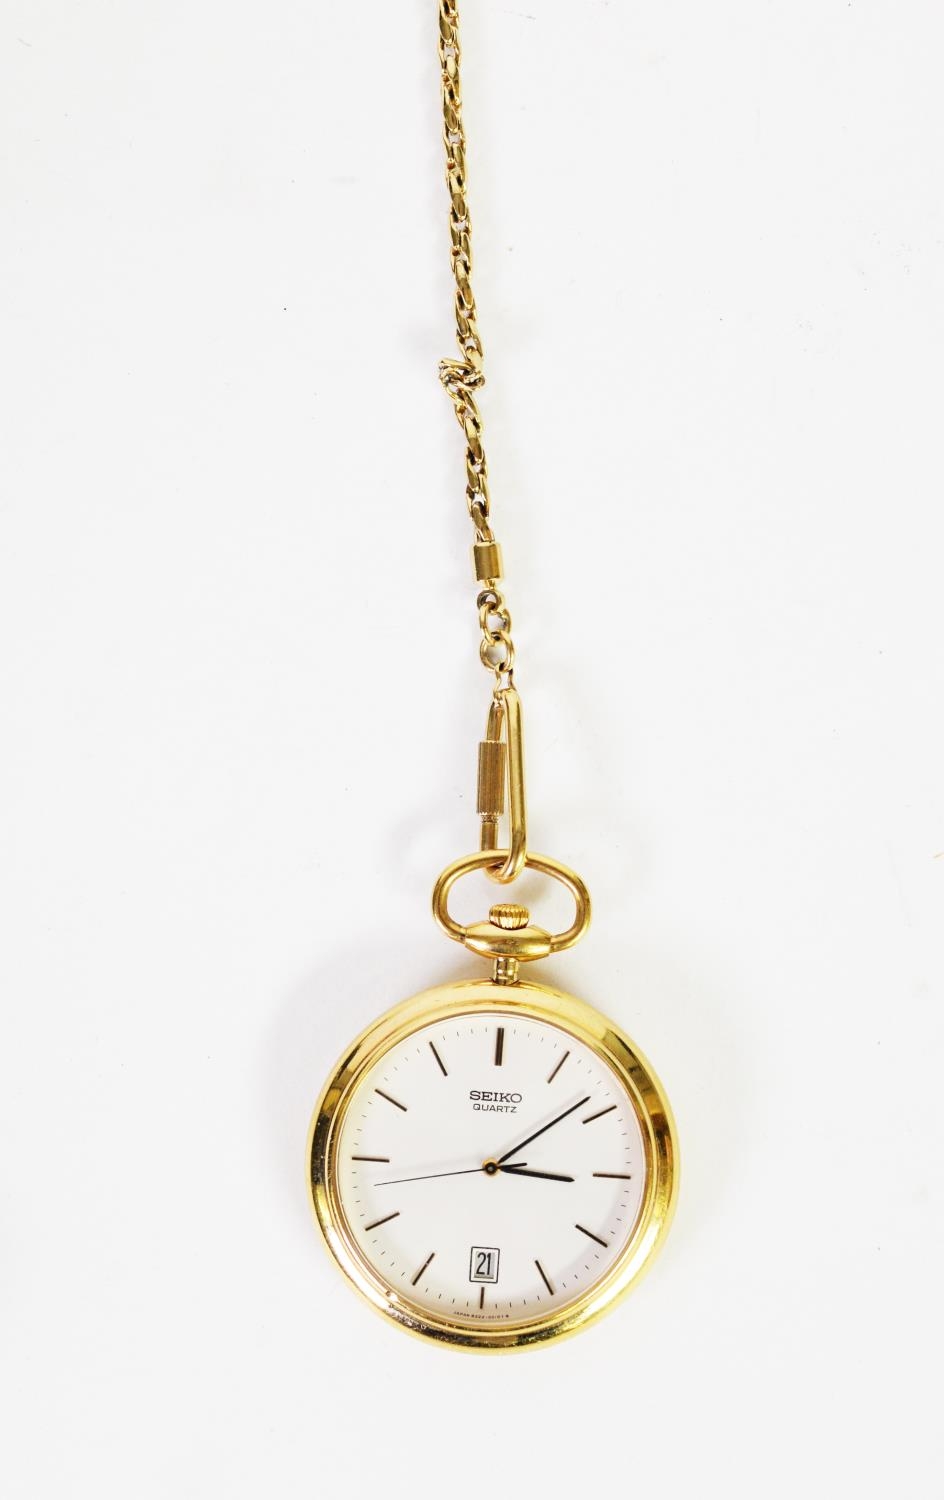 SEIKO QUARTZ OPEN FACED POCKET WATCH in gold plated case engraved with initials D.F.C., the white